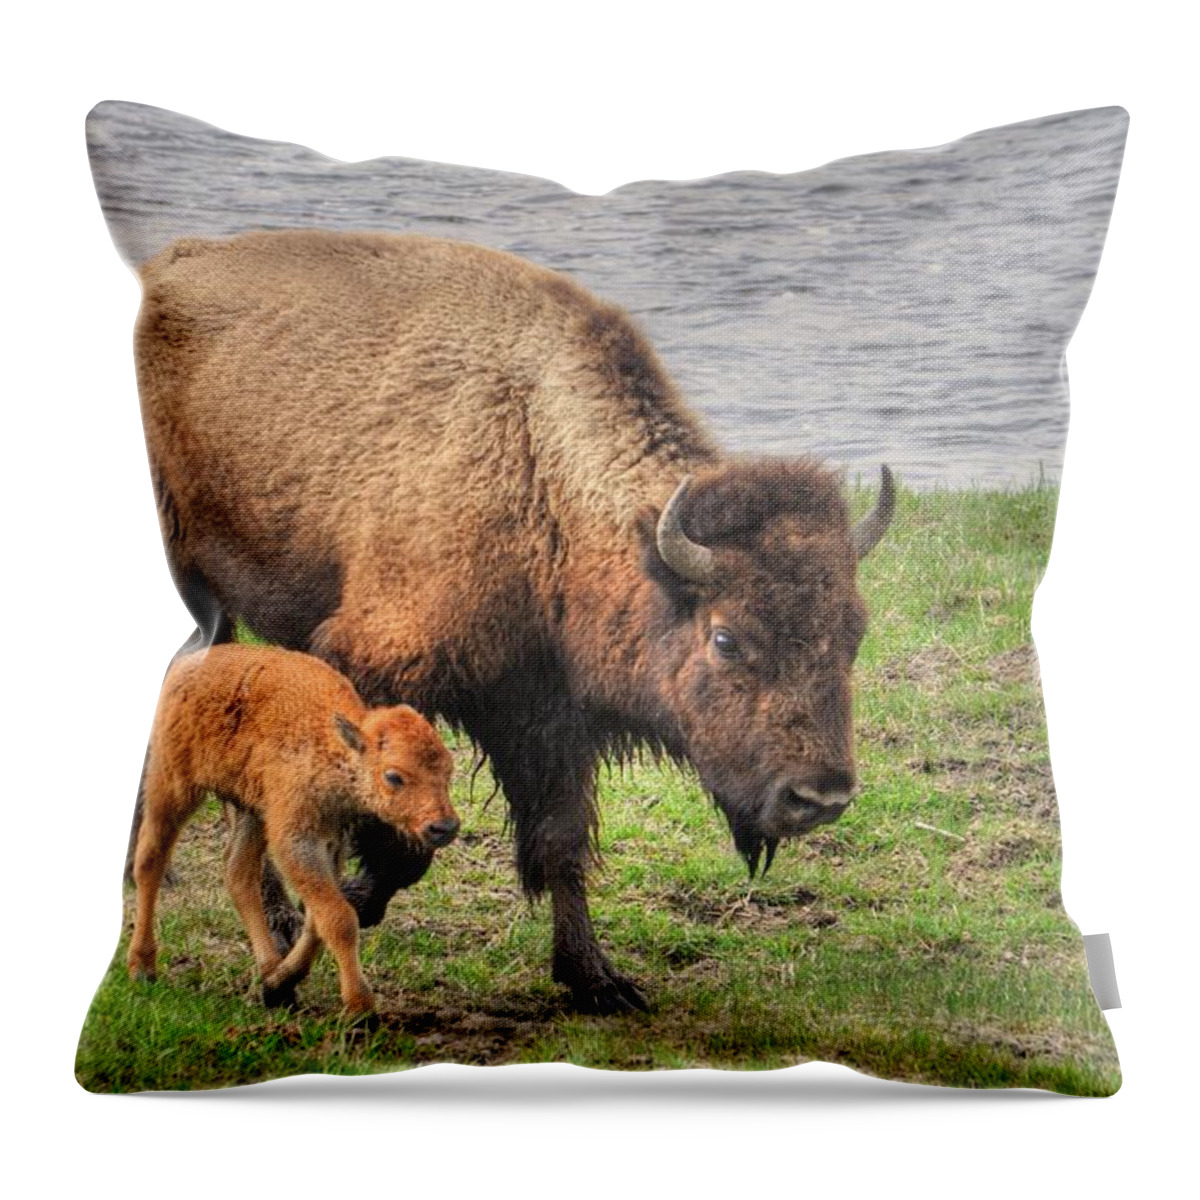 Grass Throw Pillow featuring the photograph Bison Mother And Her Baby, Yellowstone by Ben Leshchinsky